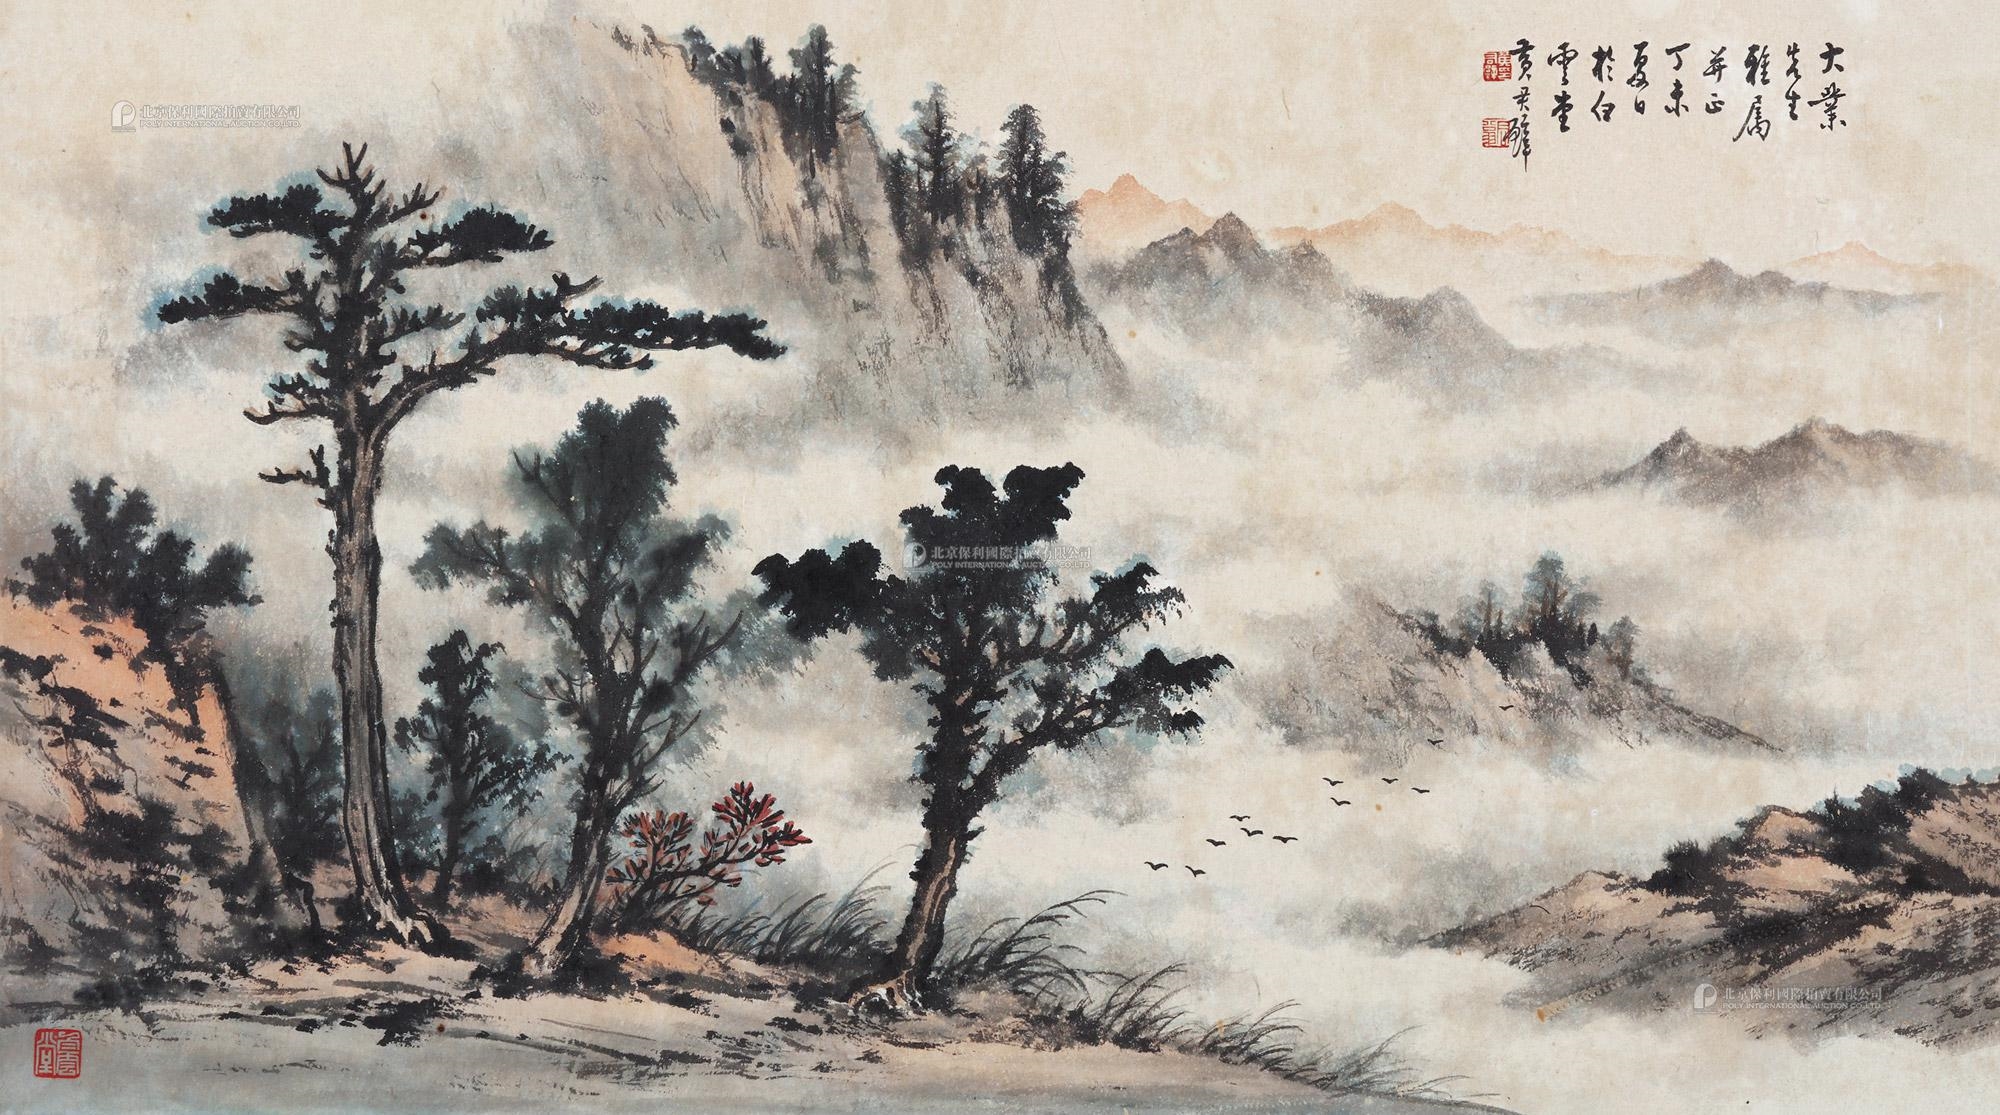 Landscape In Autumn by Huang Junbi, Dated 1967